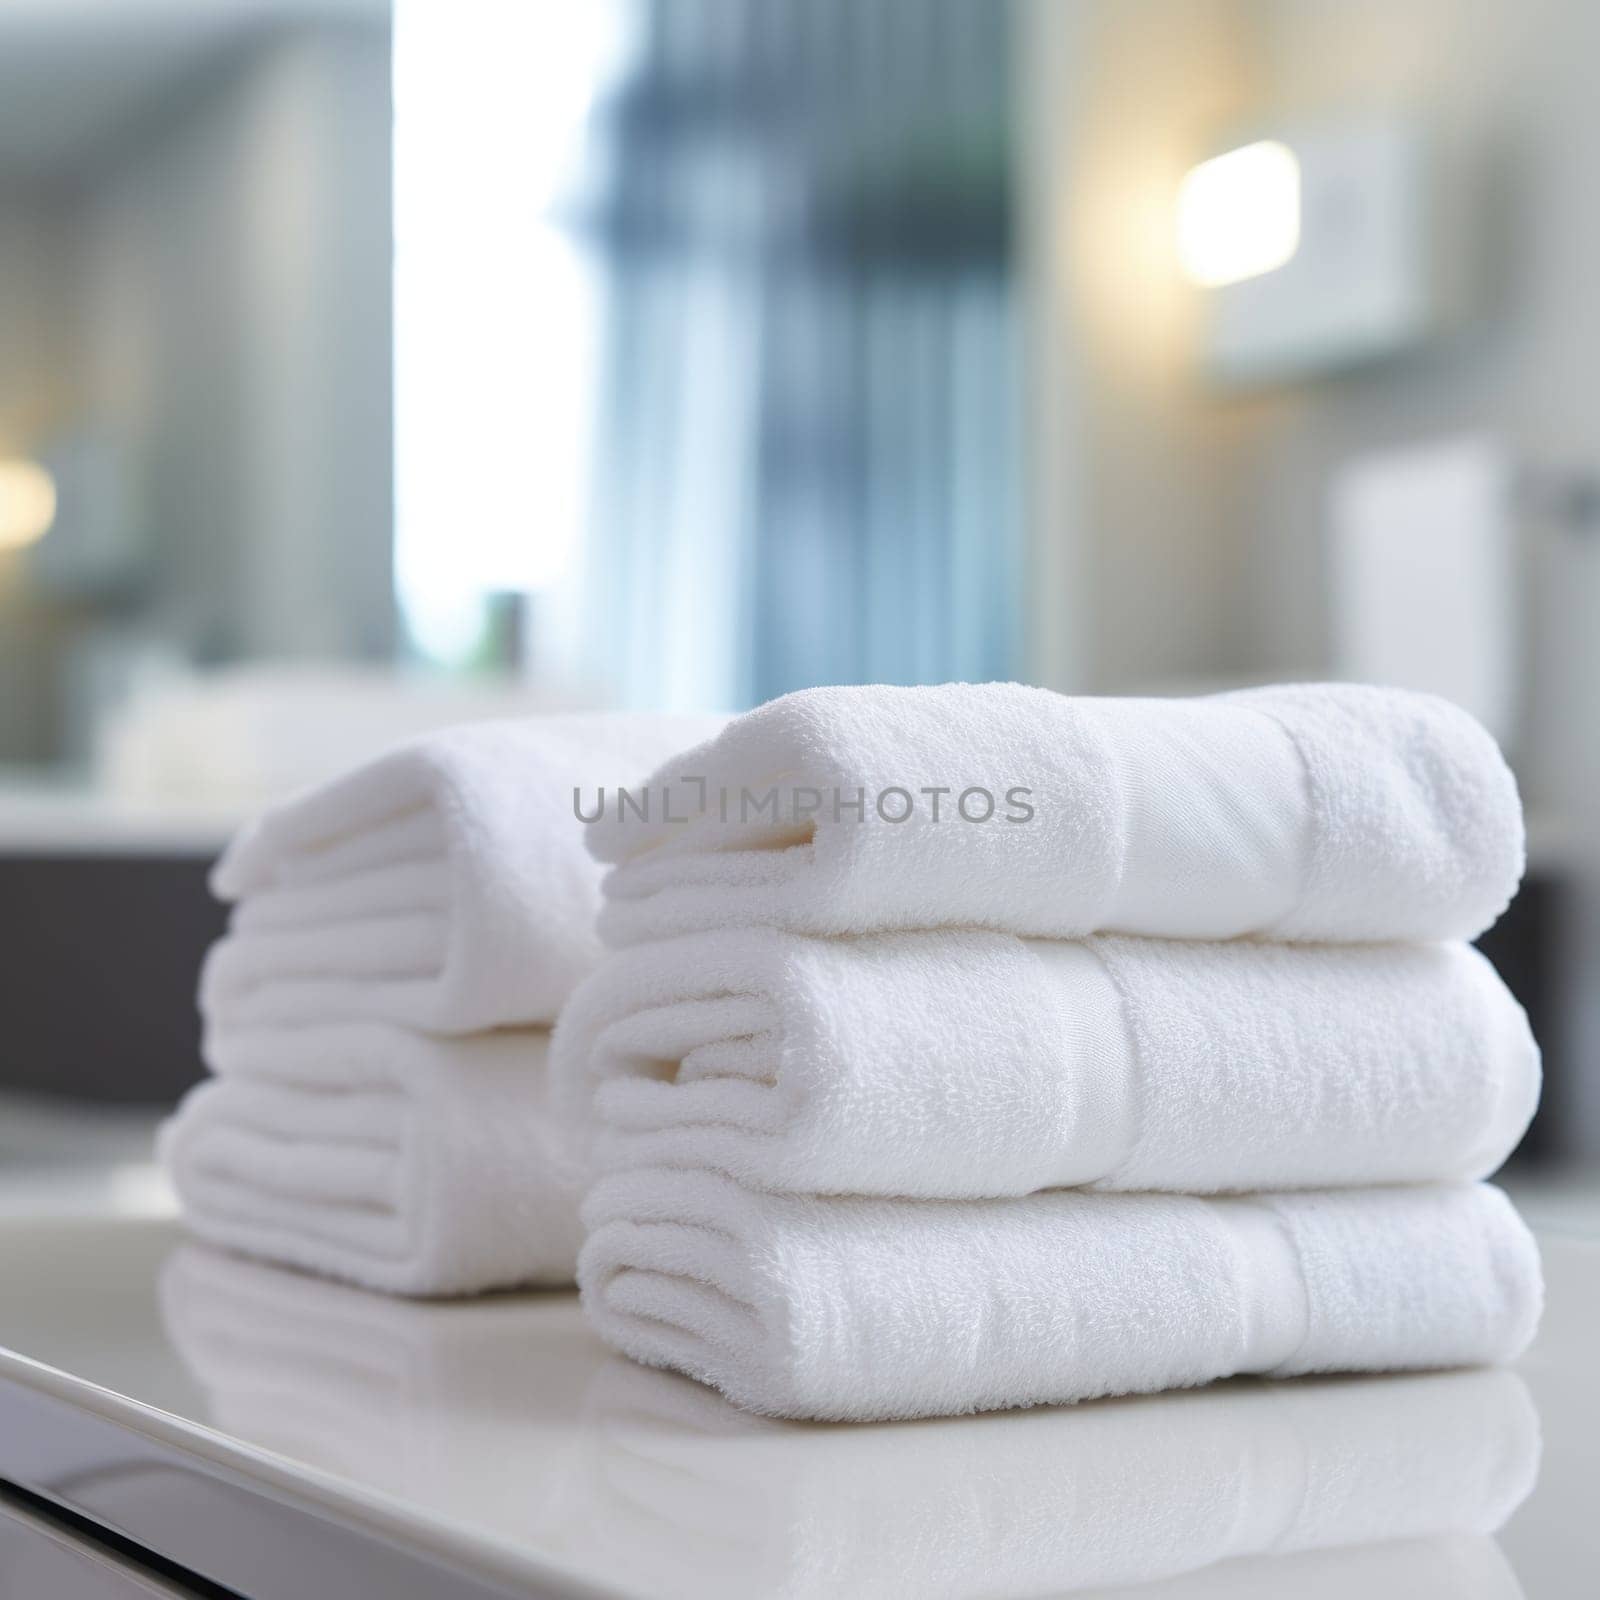 A stack of white towels on a counter